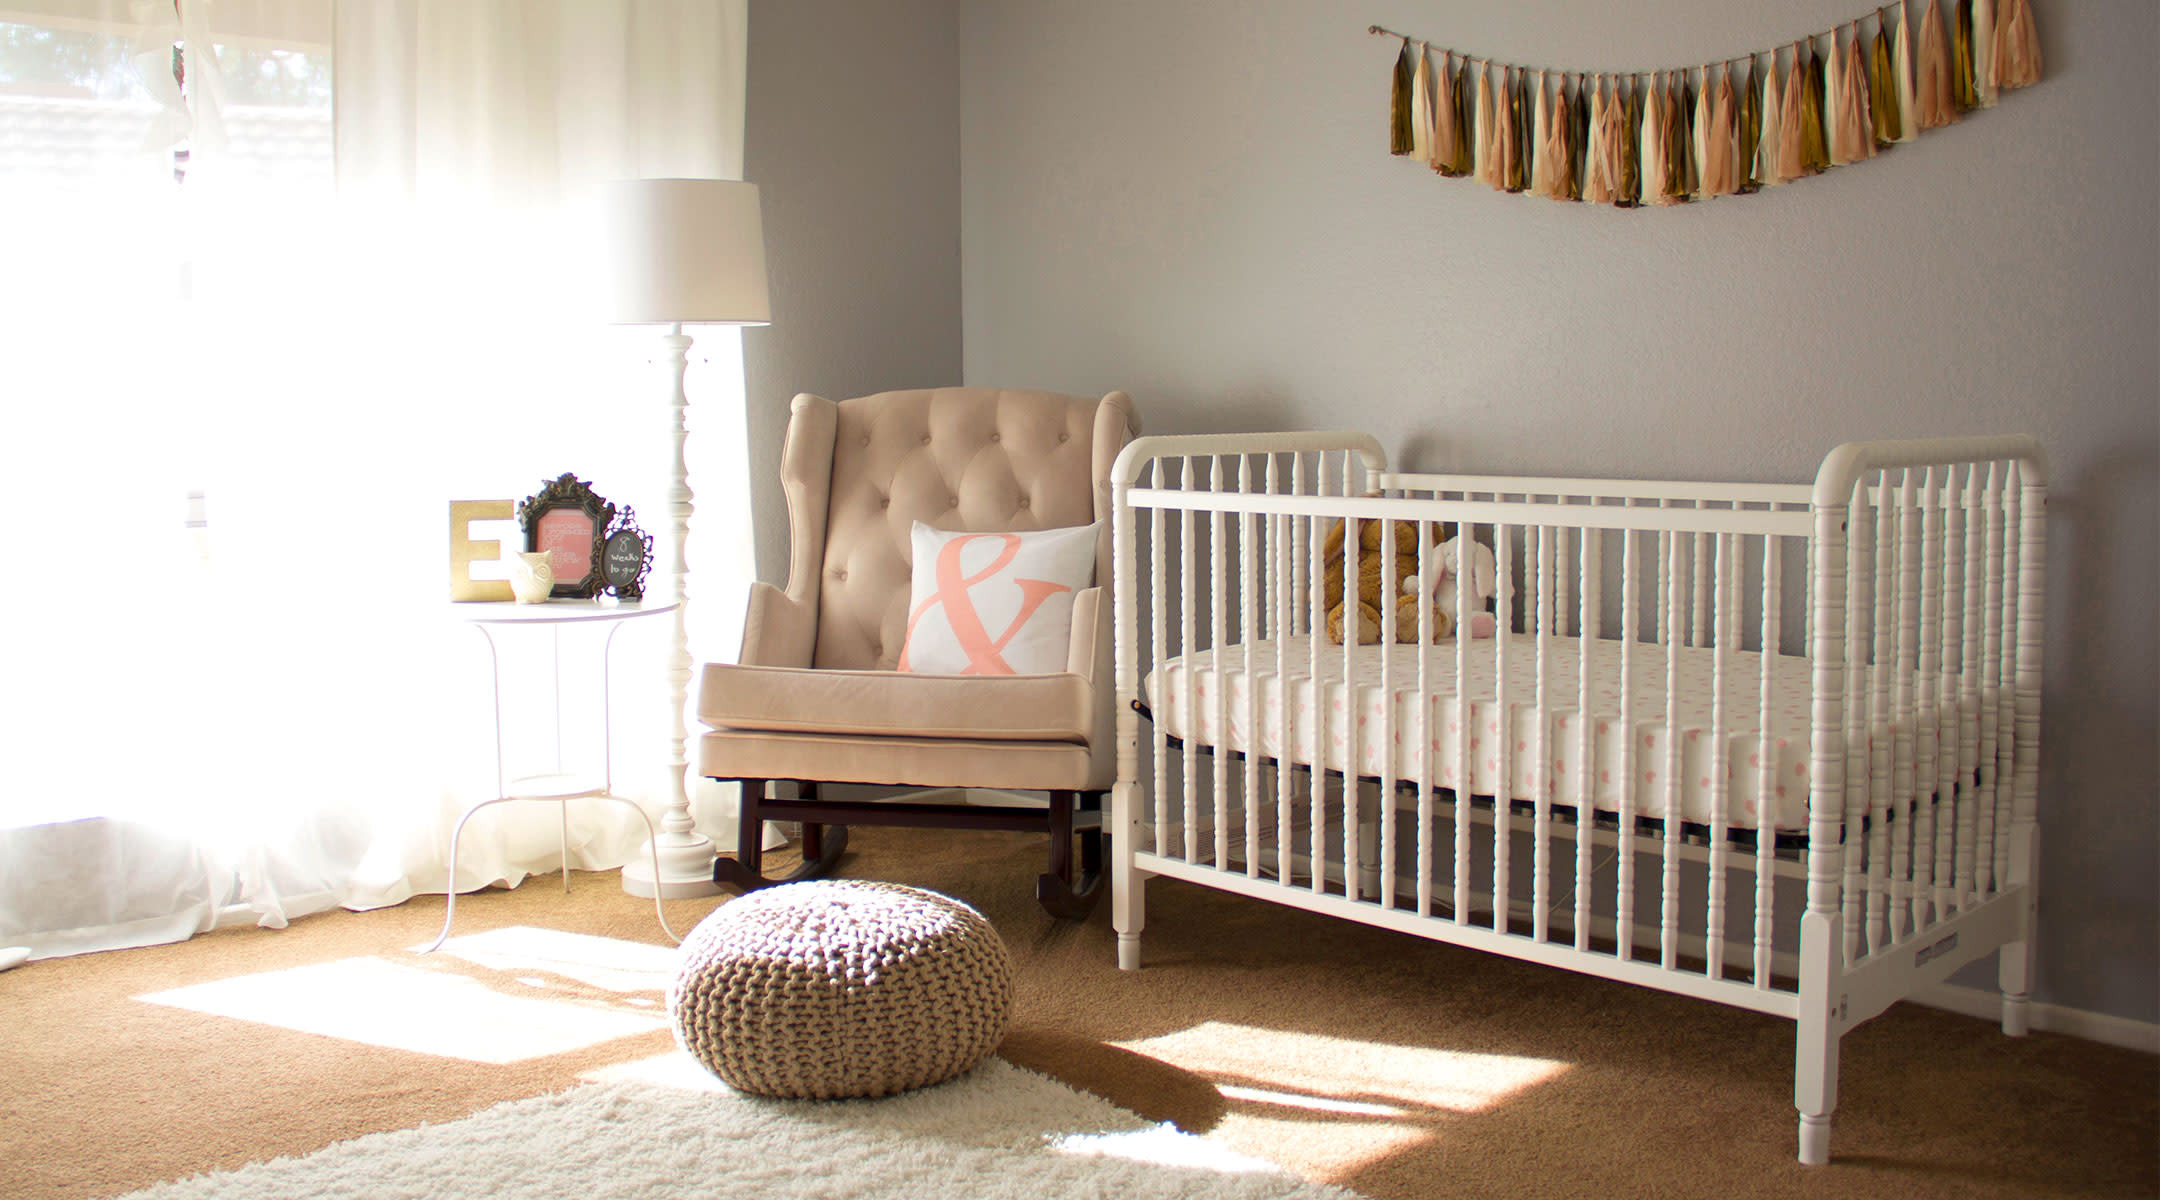 How To Decorate Baby Room
 Tips For Decorating The Nursery